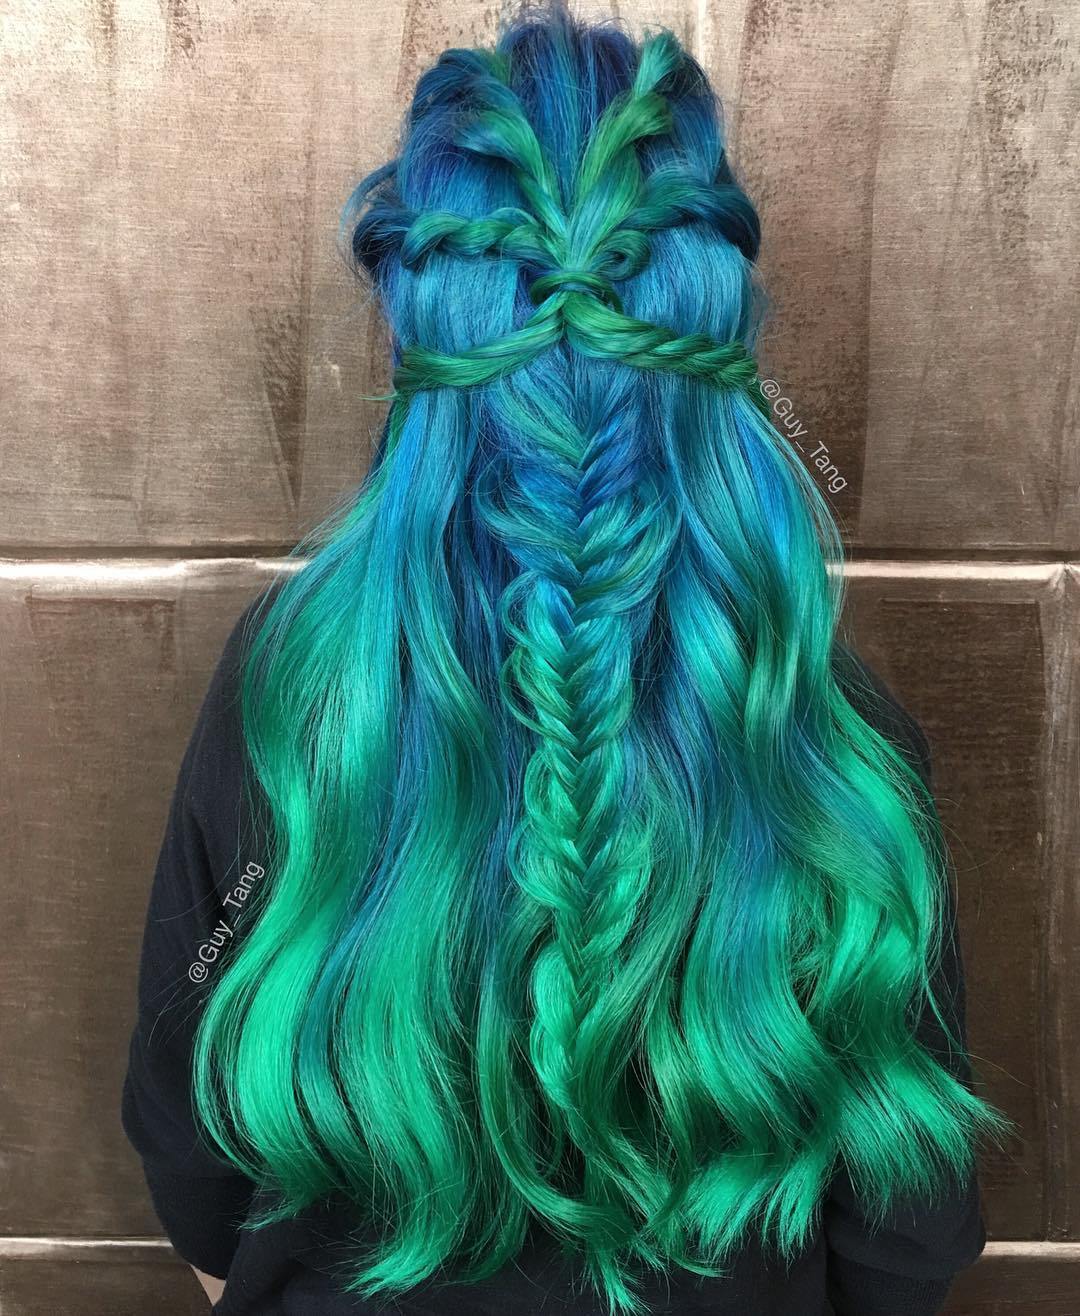 dlho Blue And Green Hair